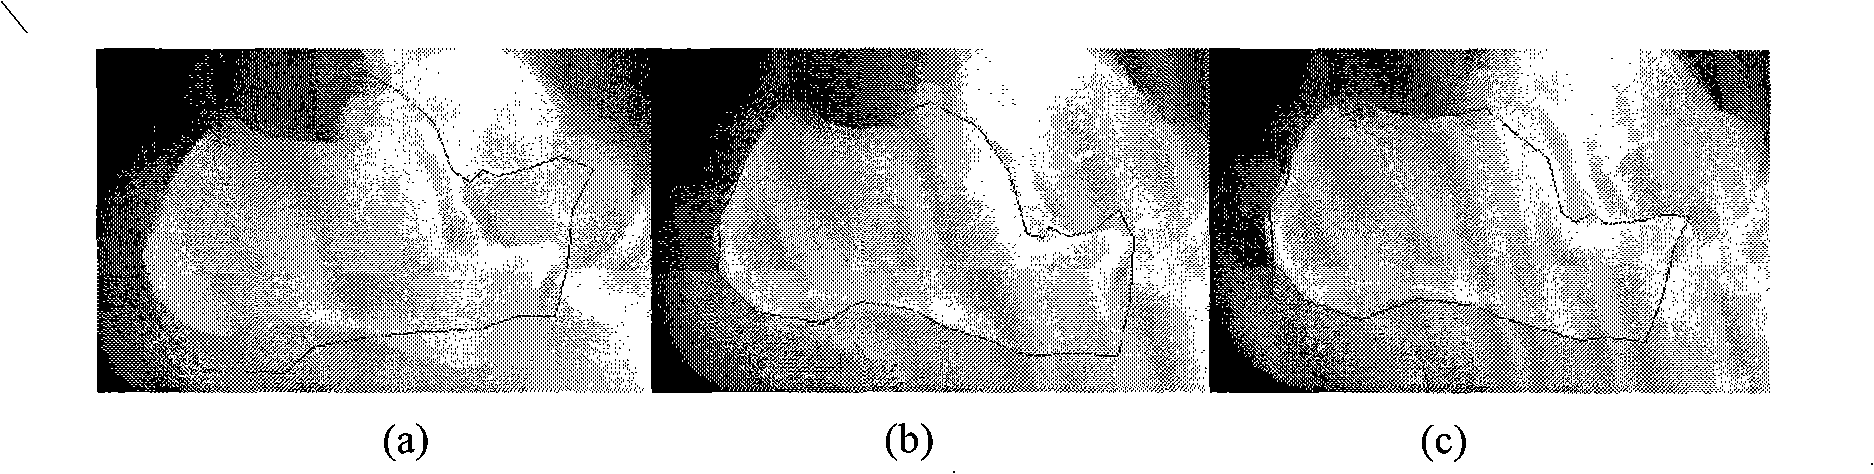 Method for analysis of picture distortion based on constant moment